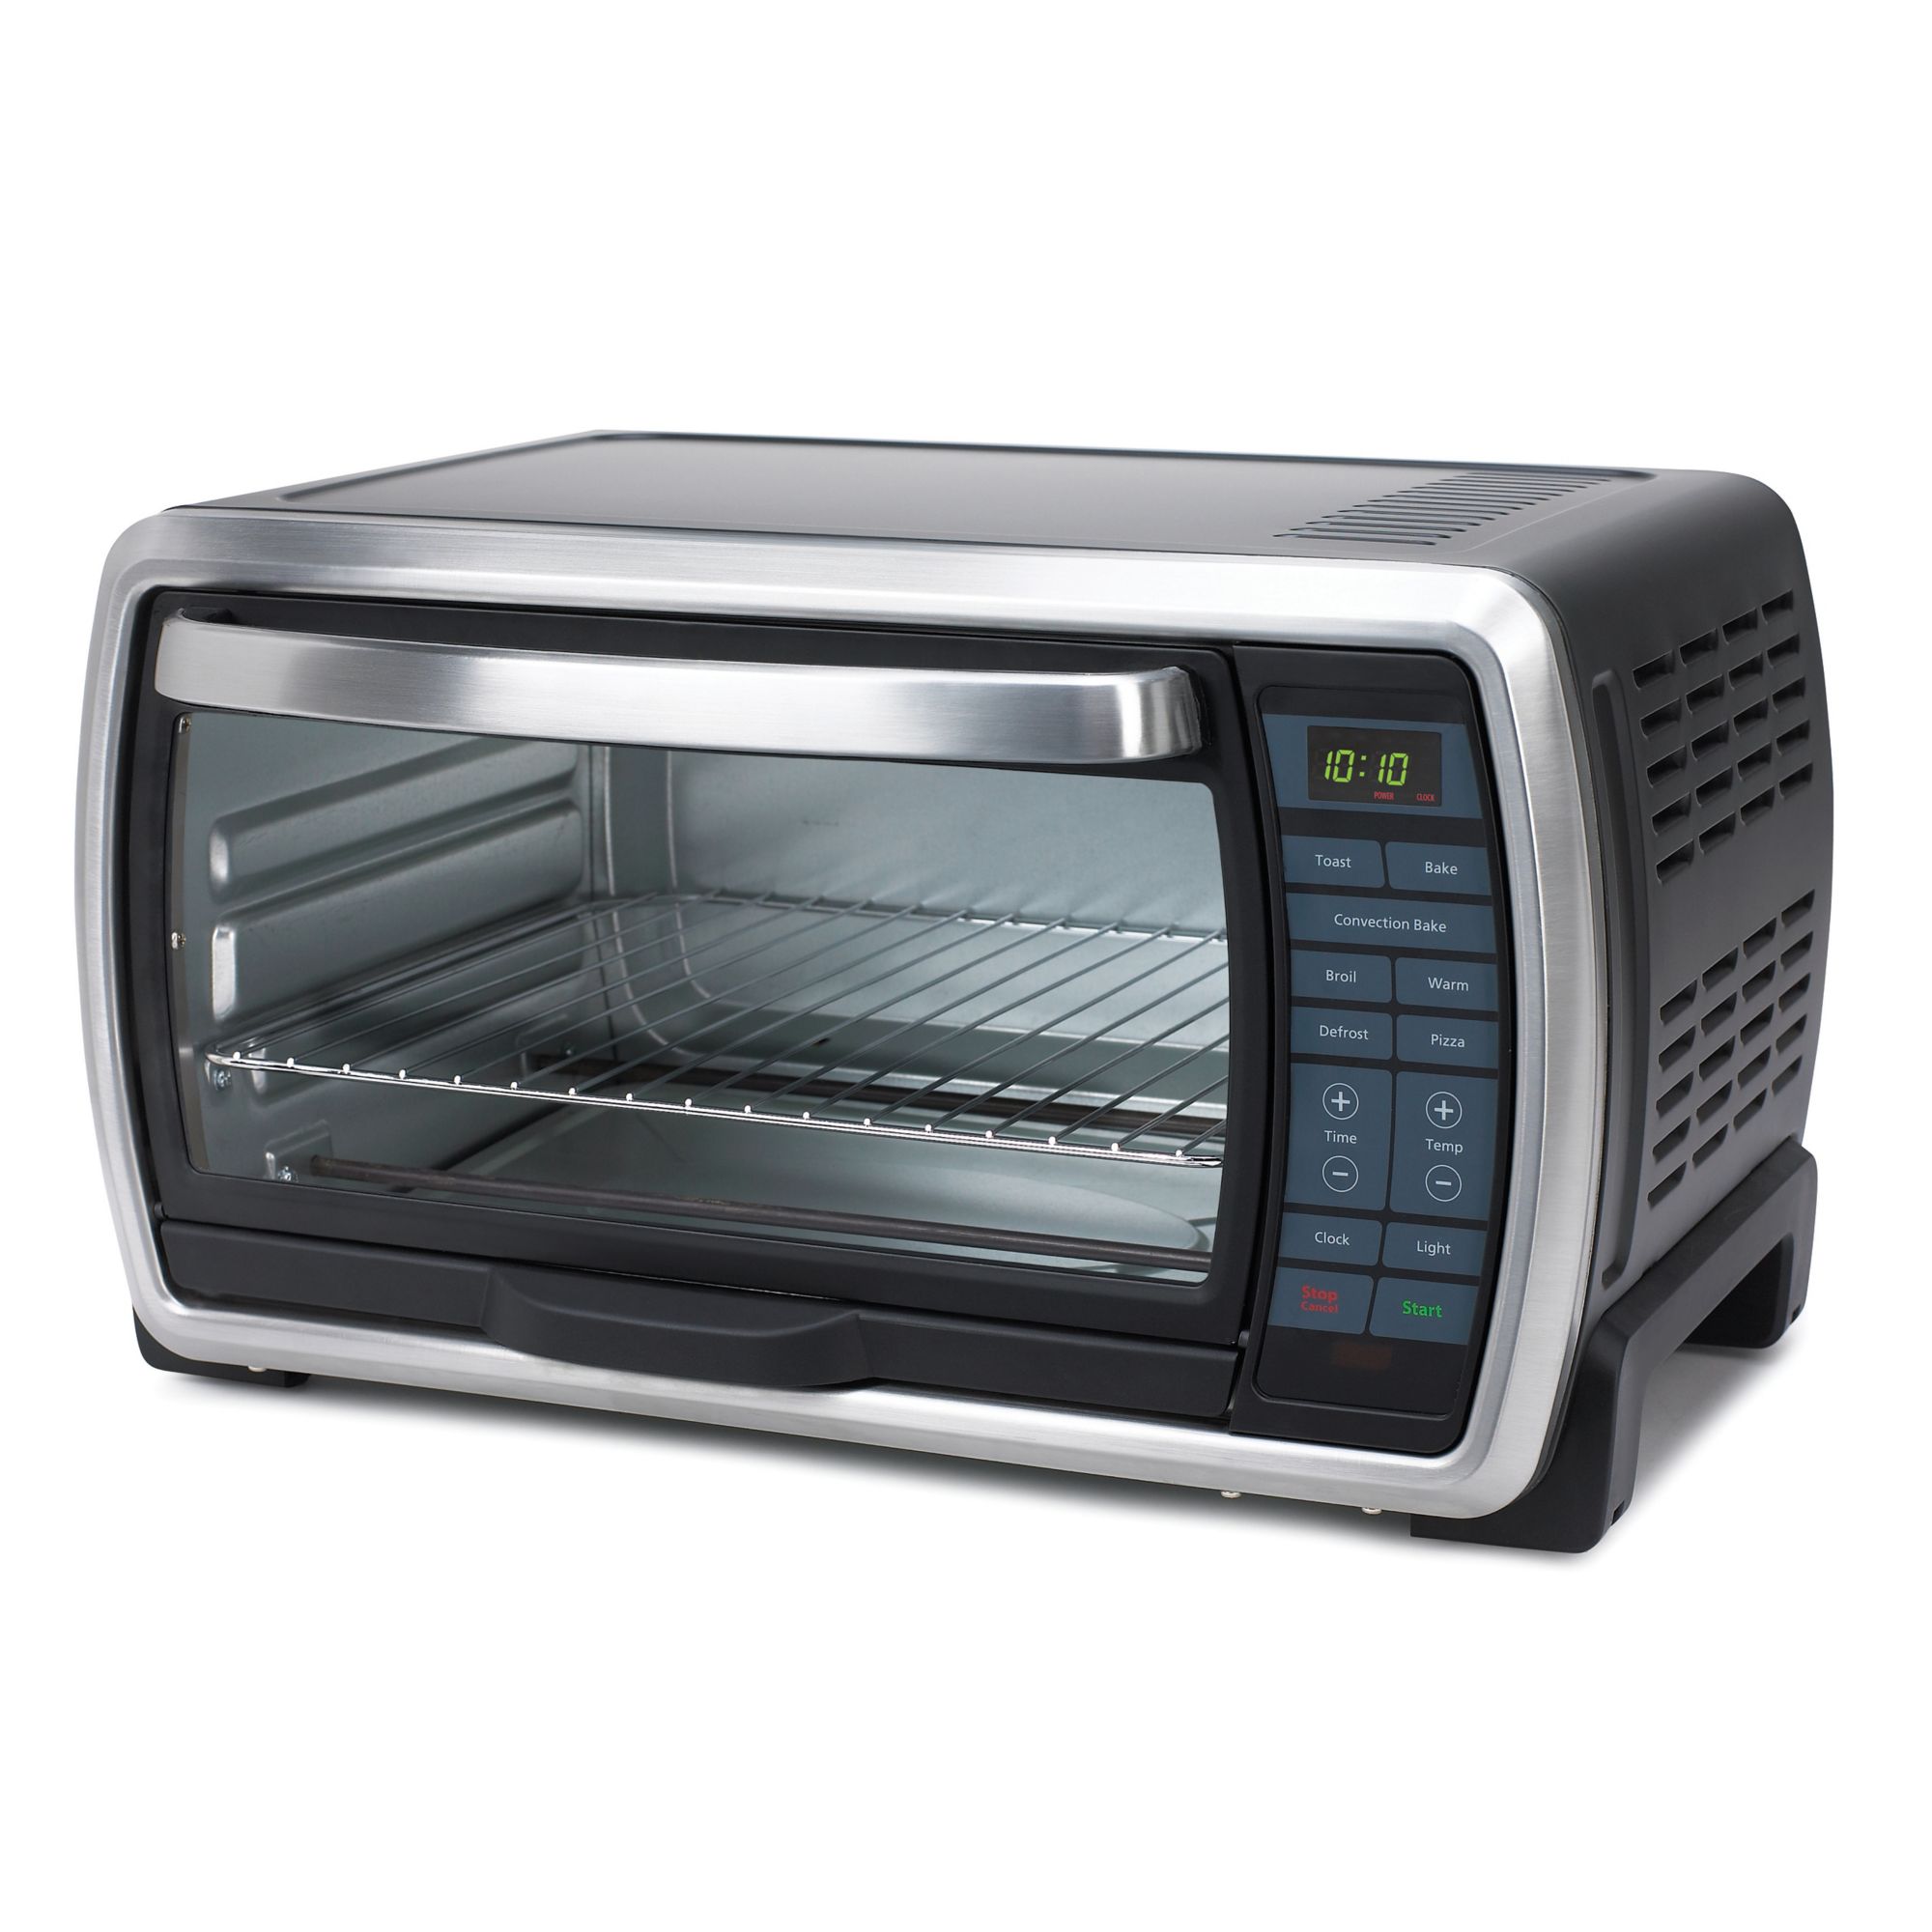  Oster Toaster Oven, 7-in-1 Countertop Toaster Oven, 10.5 x 13  Fits 2 Large Pizzas, Stainless Steel : Home & Kitchen